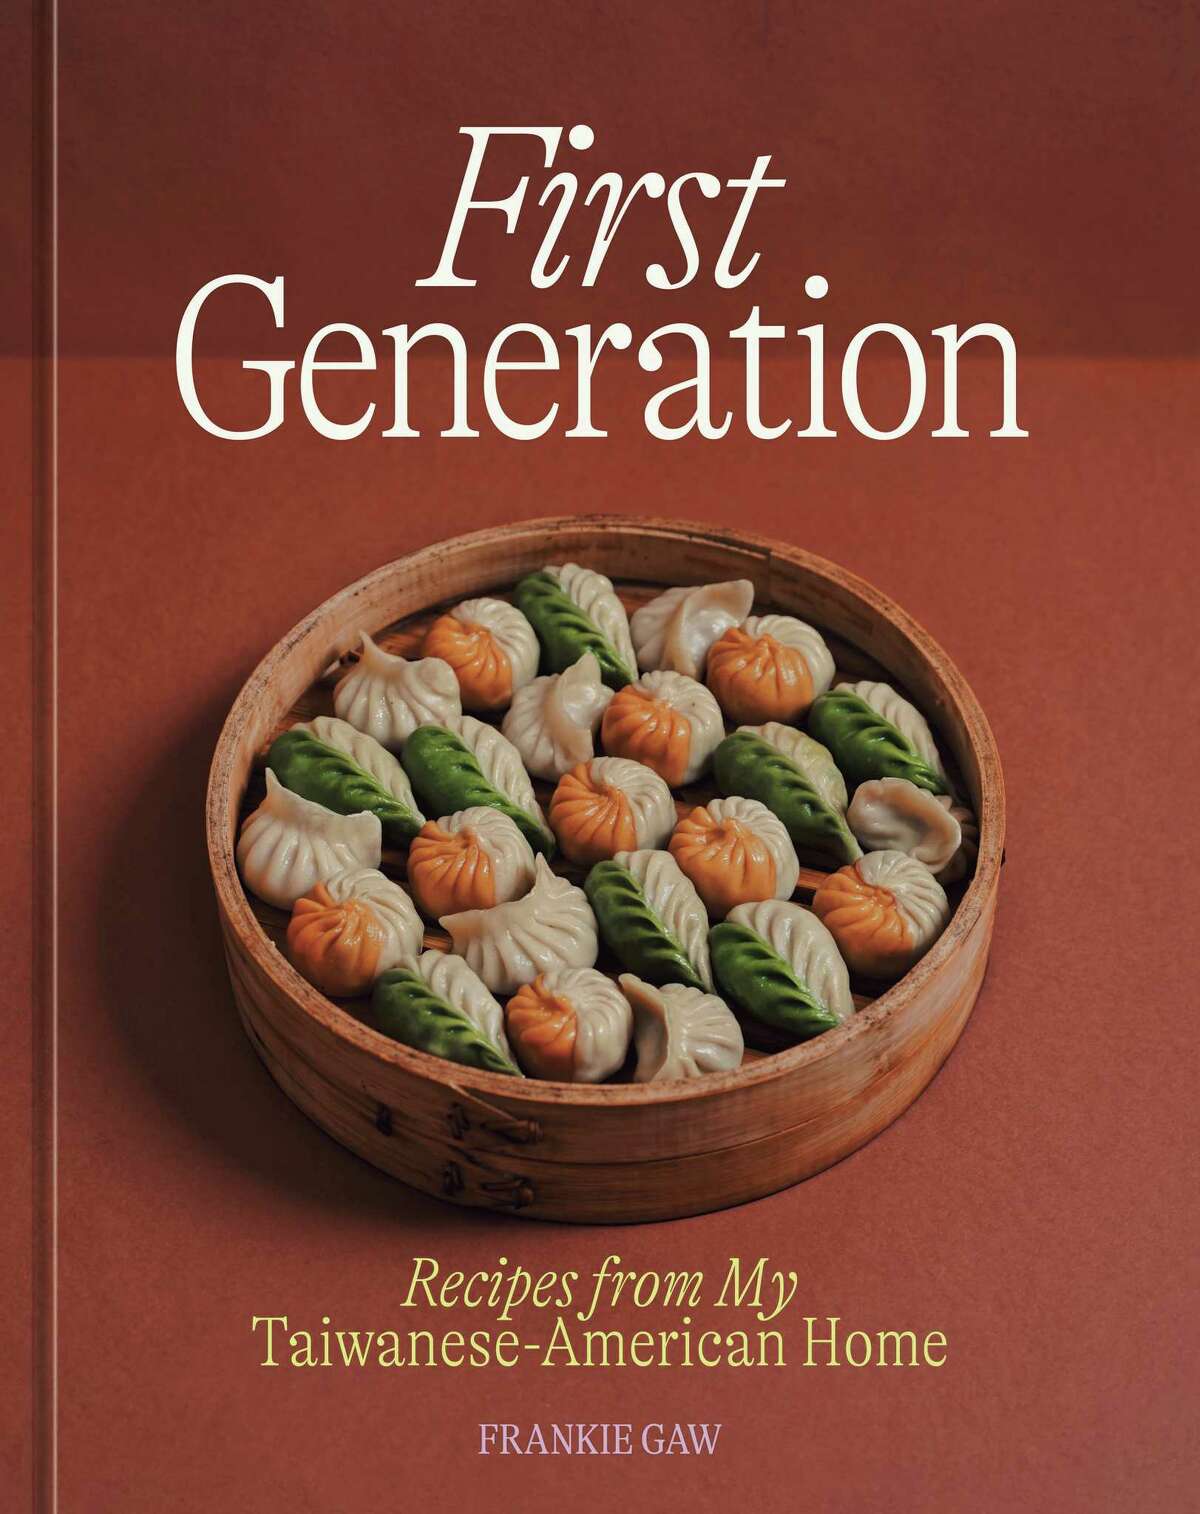 The cover of "First Generation: Recipes from My Taiwanese-American Home" by Frankie Gaw.